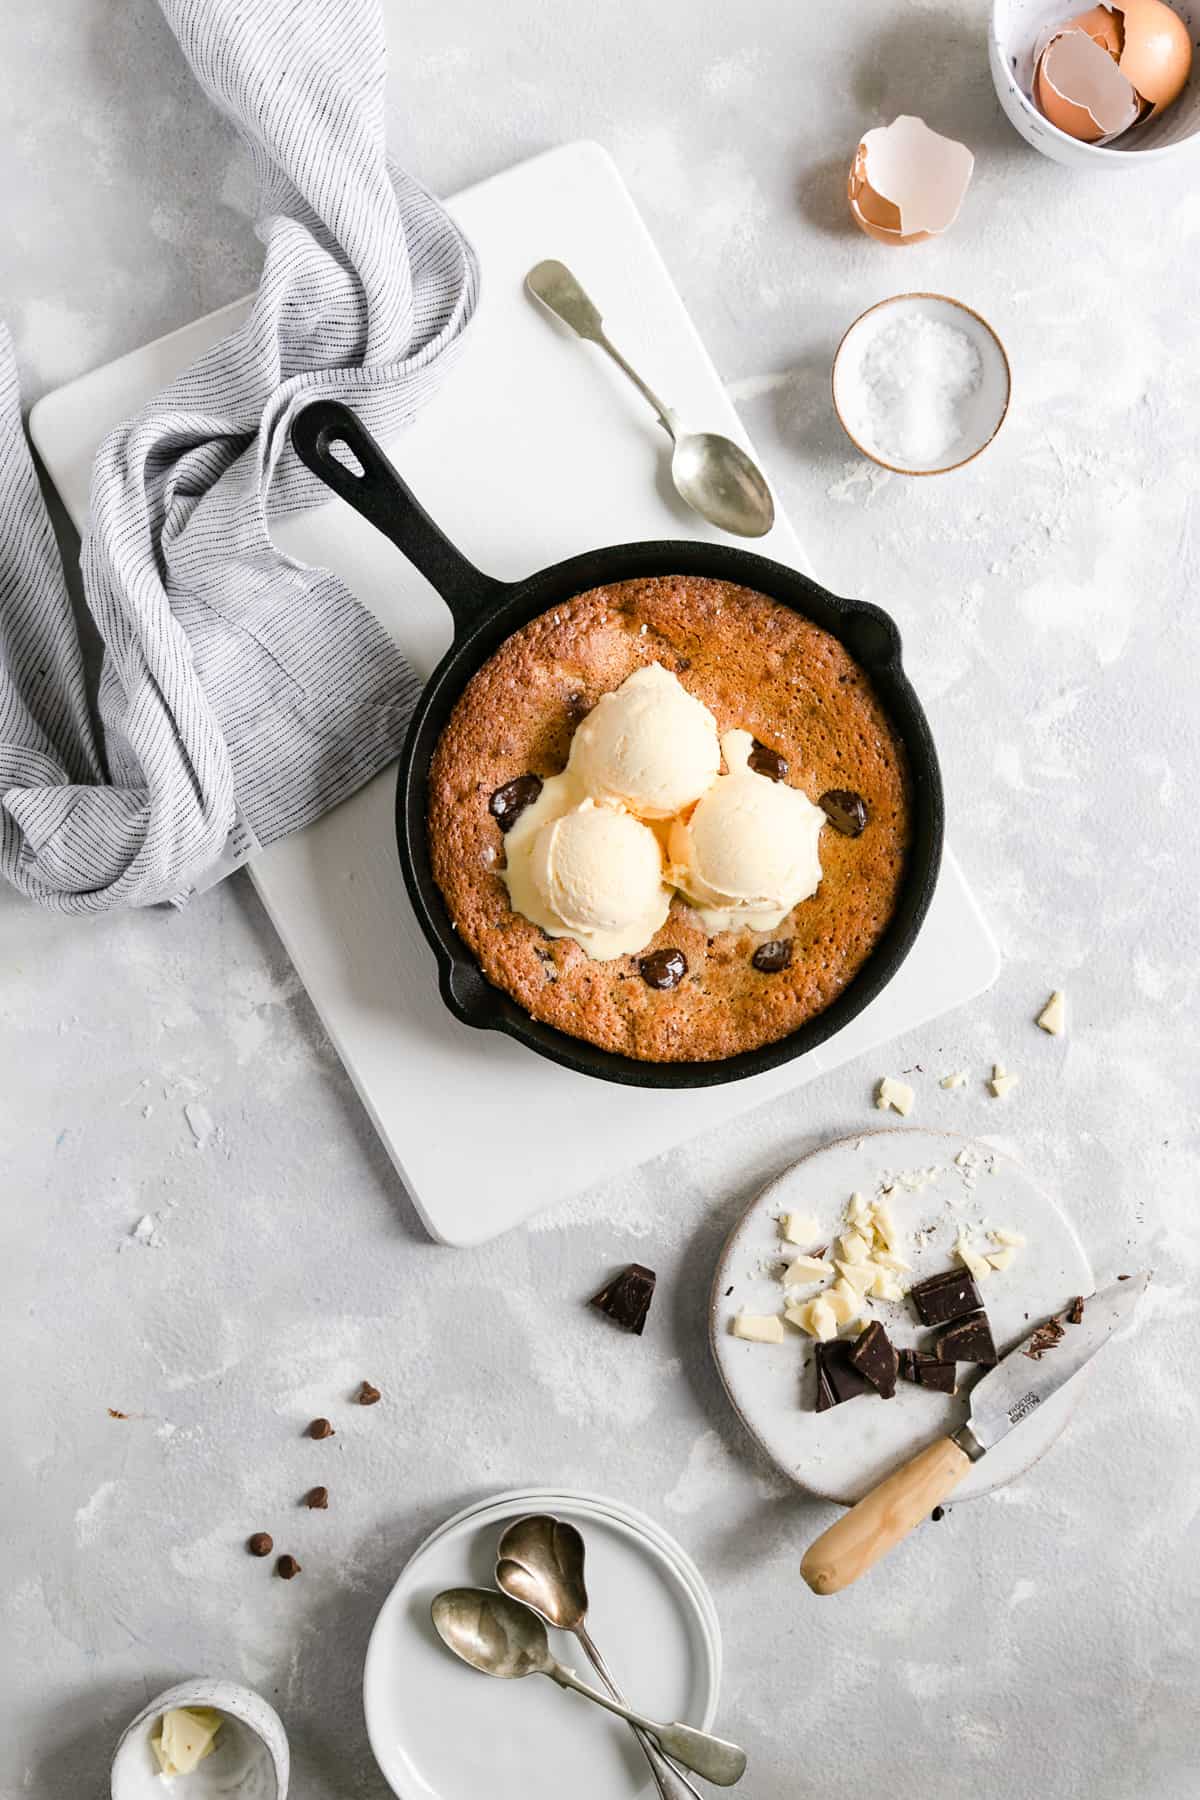 top view of chocolate chip and malted milk skillet cookie